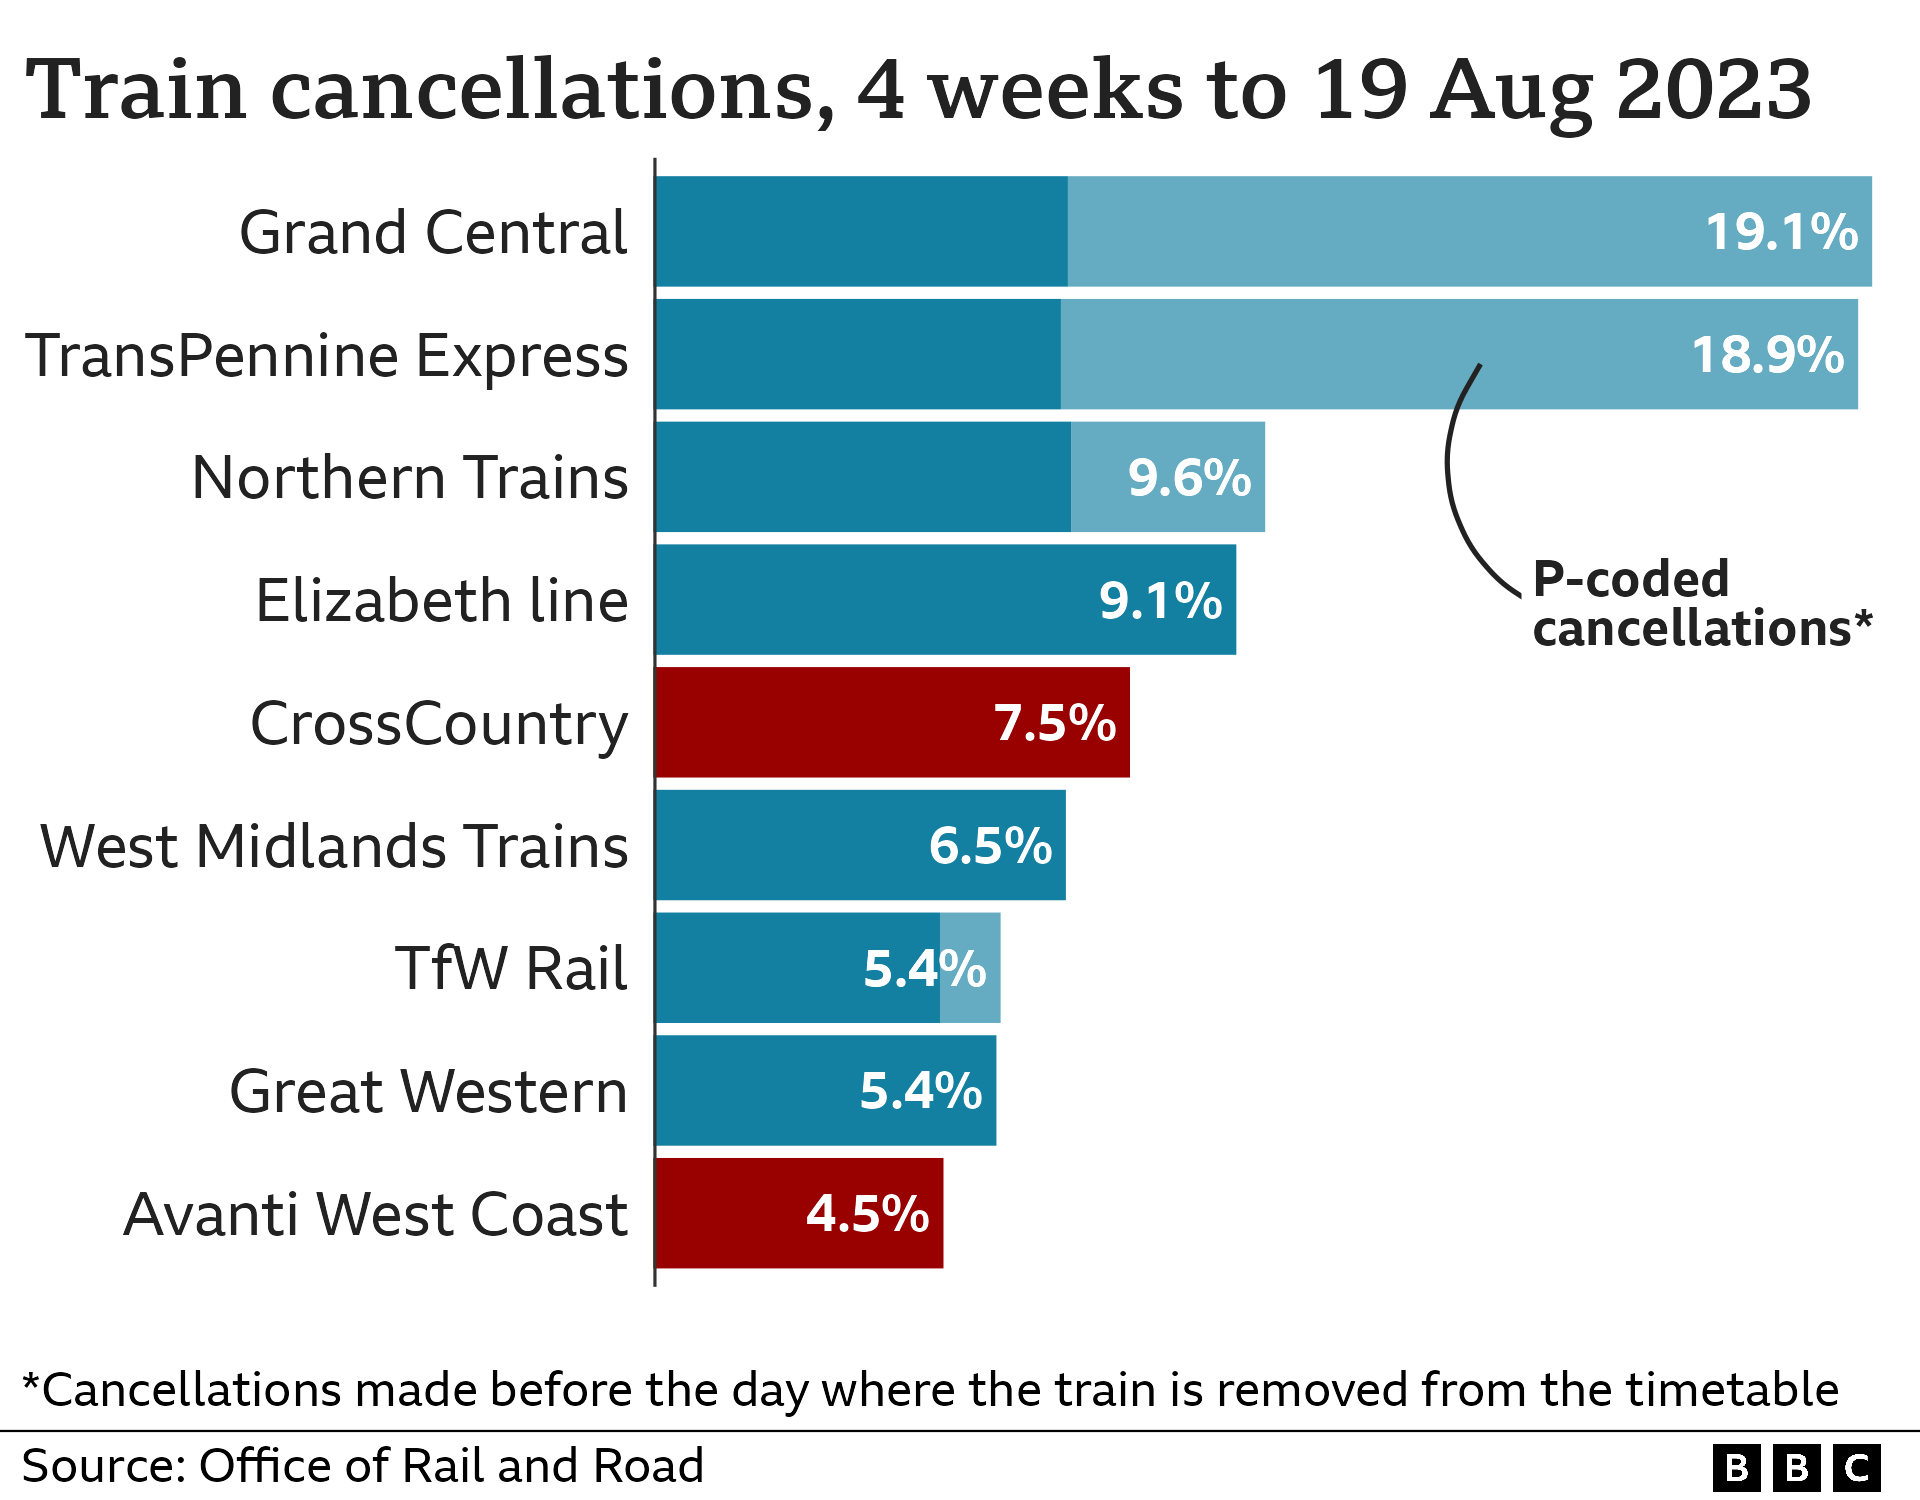 Bar chart showing the percentage of cancellations by train operator.